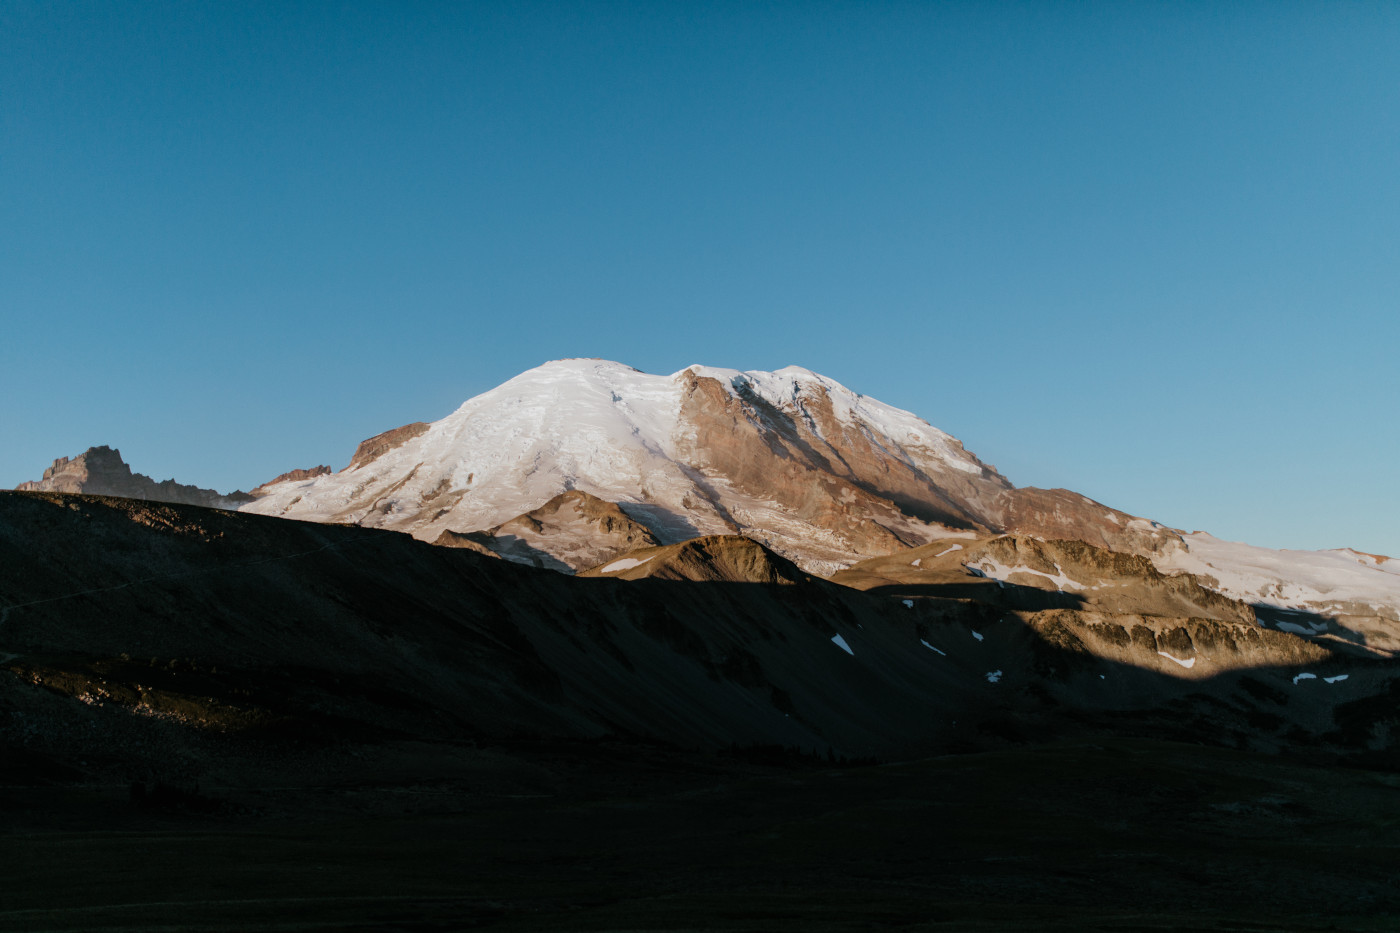 A view of the mountain. Elopement photography at Mount Rainier by Sienna Plus Josh.